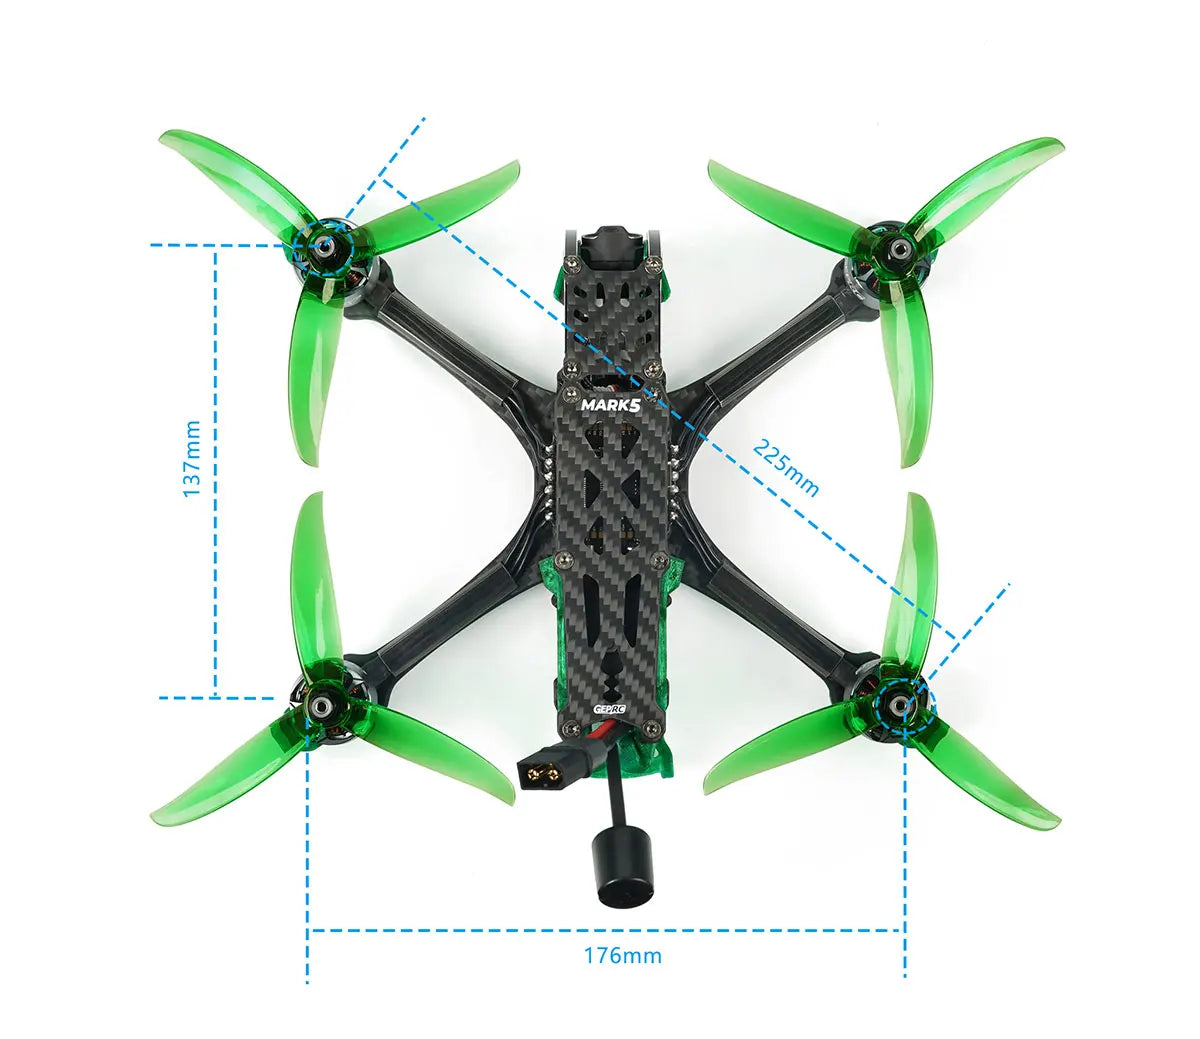 GEPRC New MARK5 HD O3 Freestyle FPV Drone, two kinds of 3D printing camera mounts are designed, which can be mounted with a